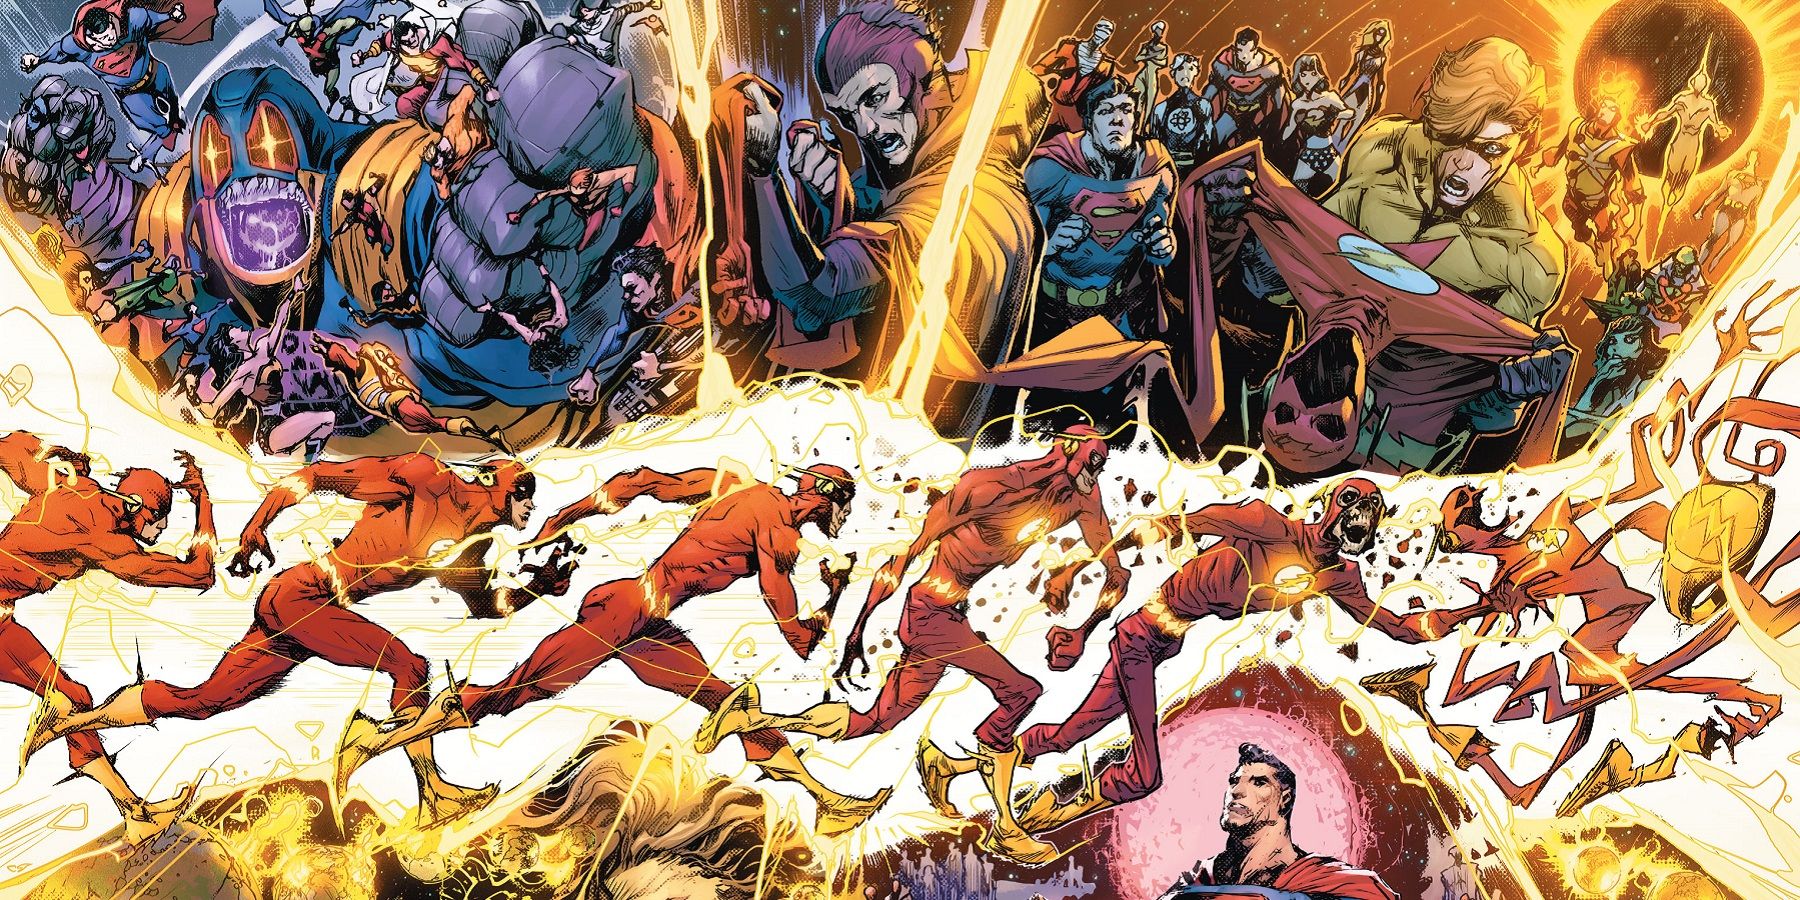 The Flash altering the timeline during the Flashpoint event